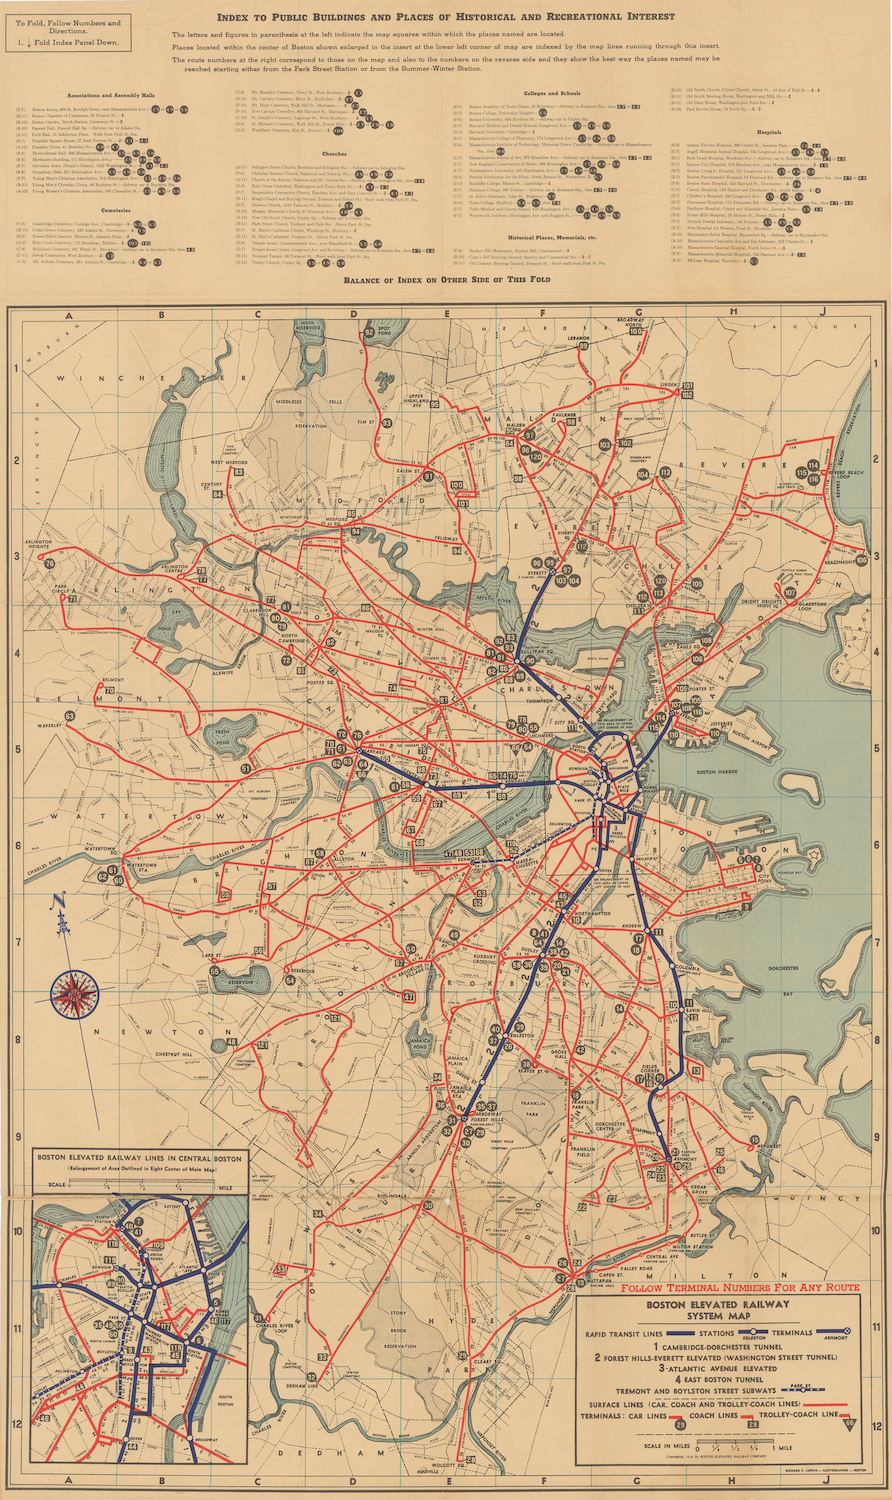 By referencing both sides of this 1936 BERy System Route map , one could locate a desired route, track operating frequencies, plot connections, and navigate all modes of the BERy’s network.